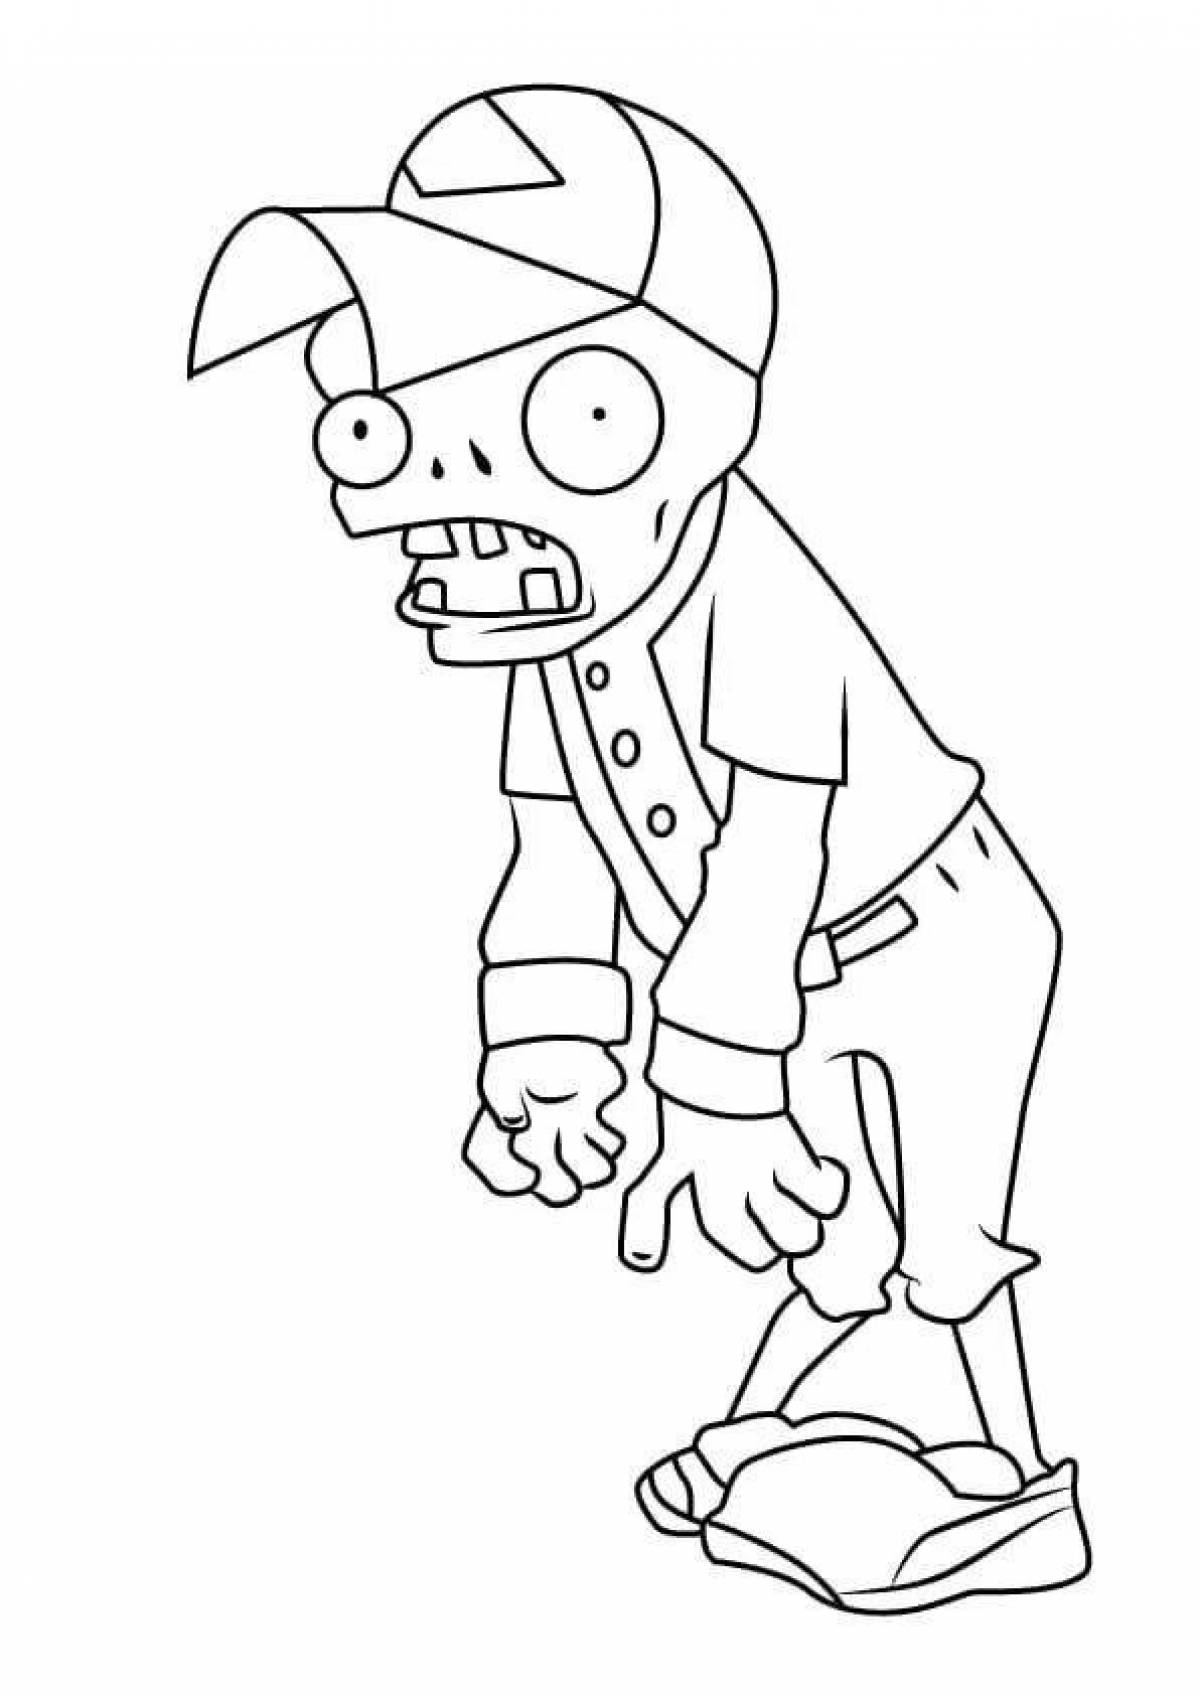 Horrible zombie coloring book